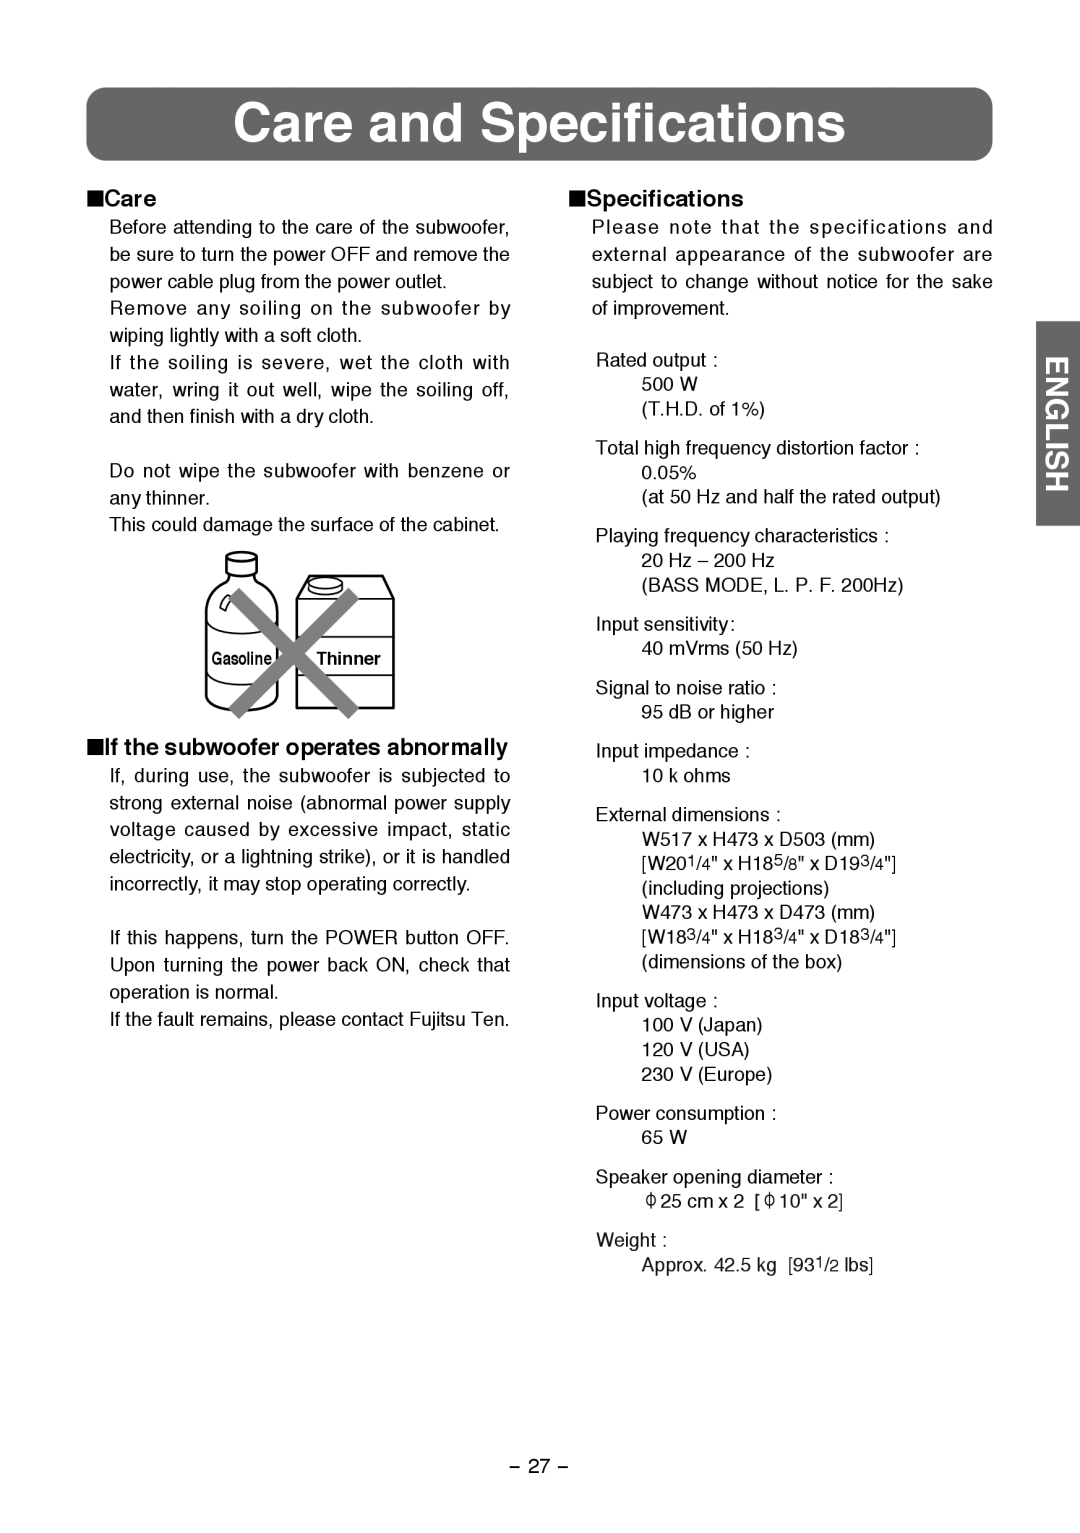 Fujitsu TD725SW instruction manual Care and Specifications, If the subwoofer operates abnormally, English 